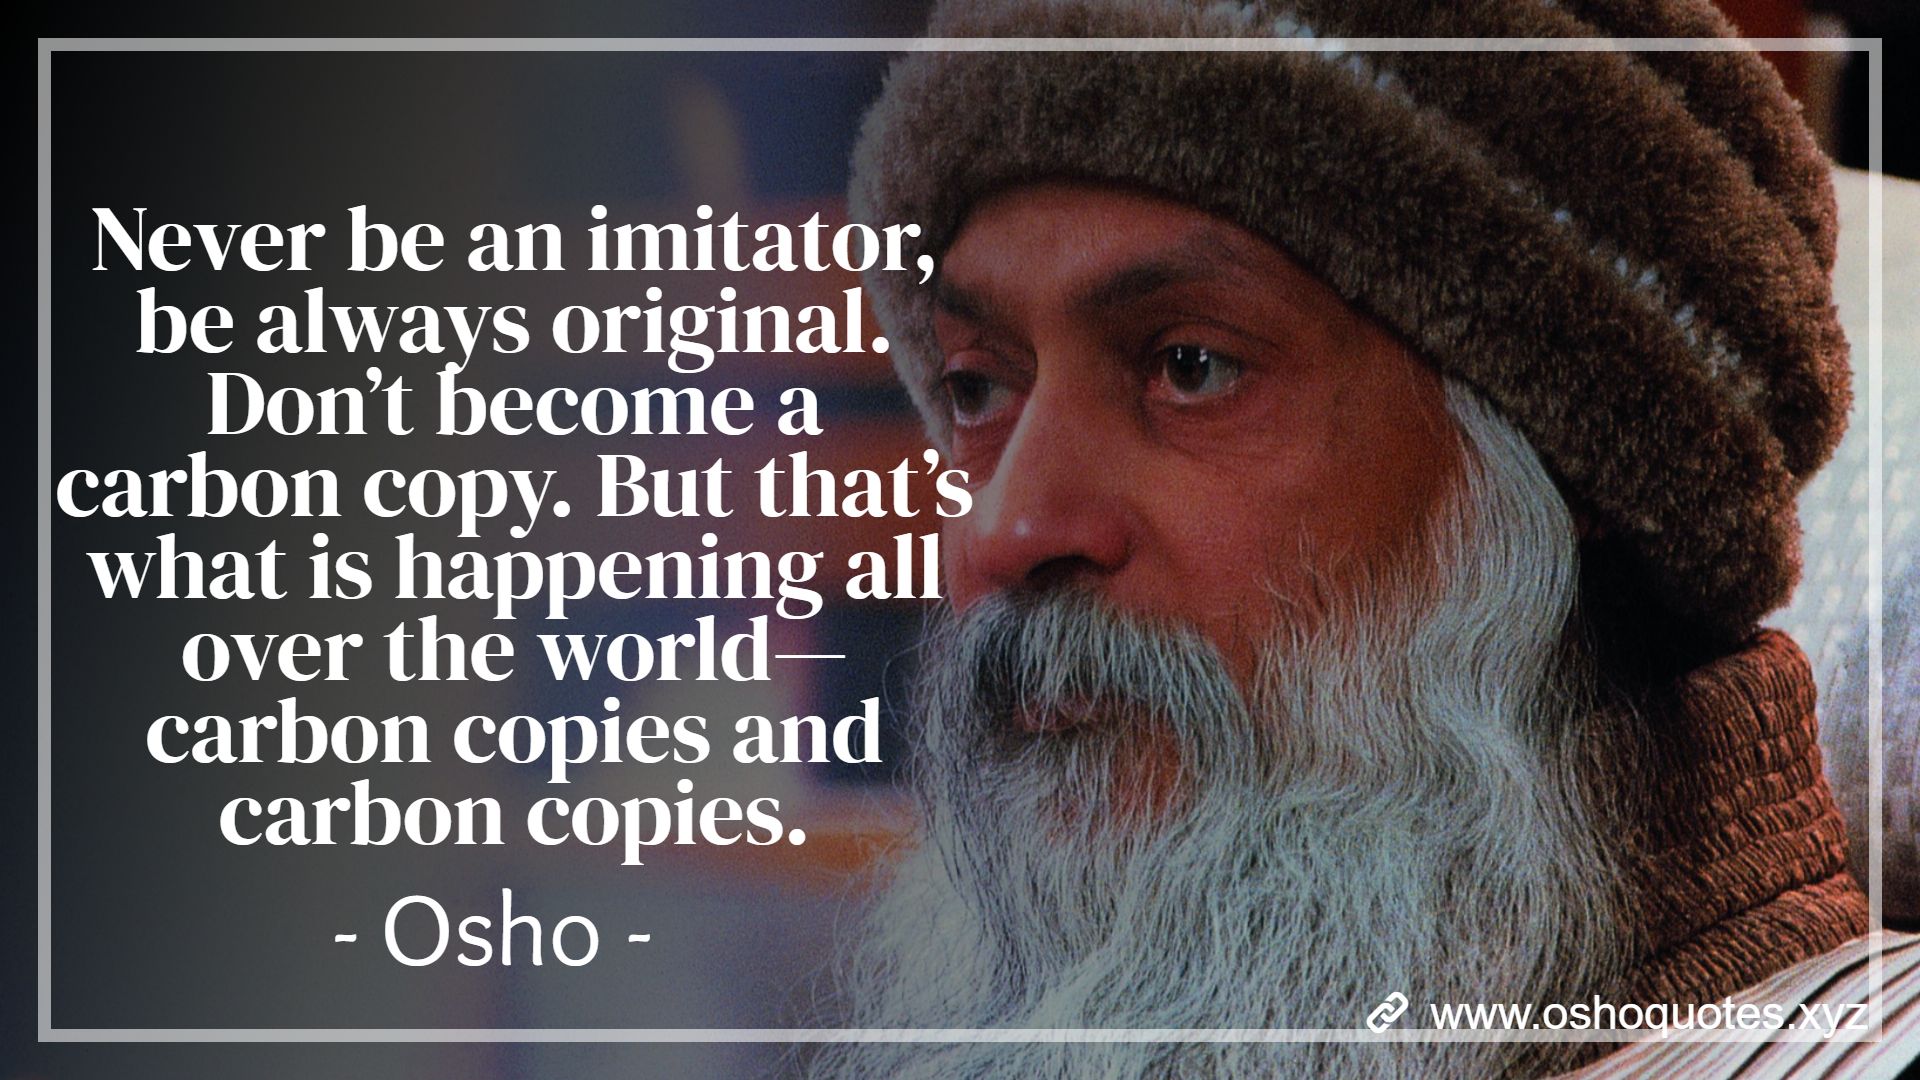 Osho Quotes on Twitter: 